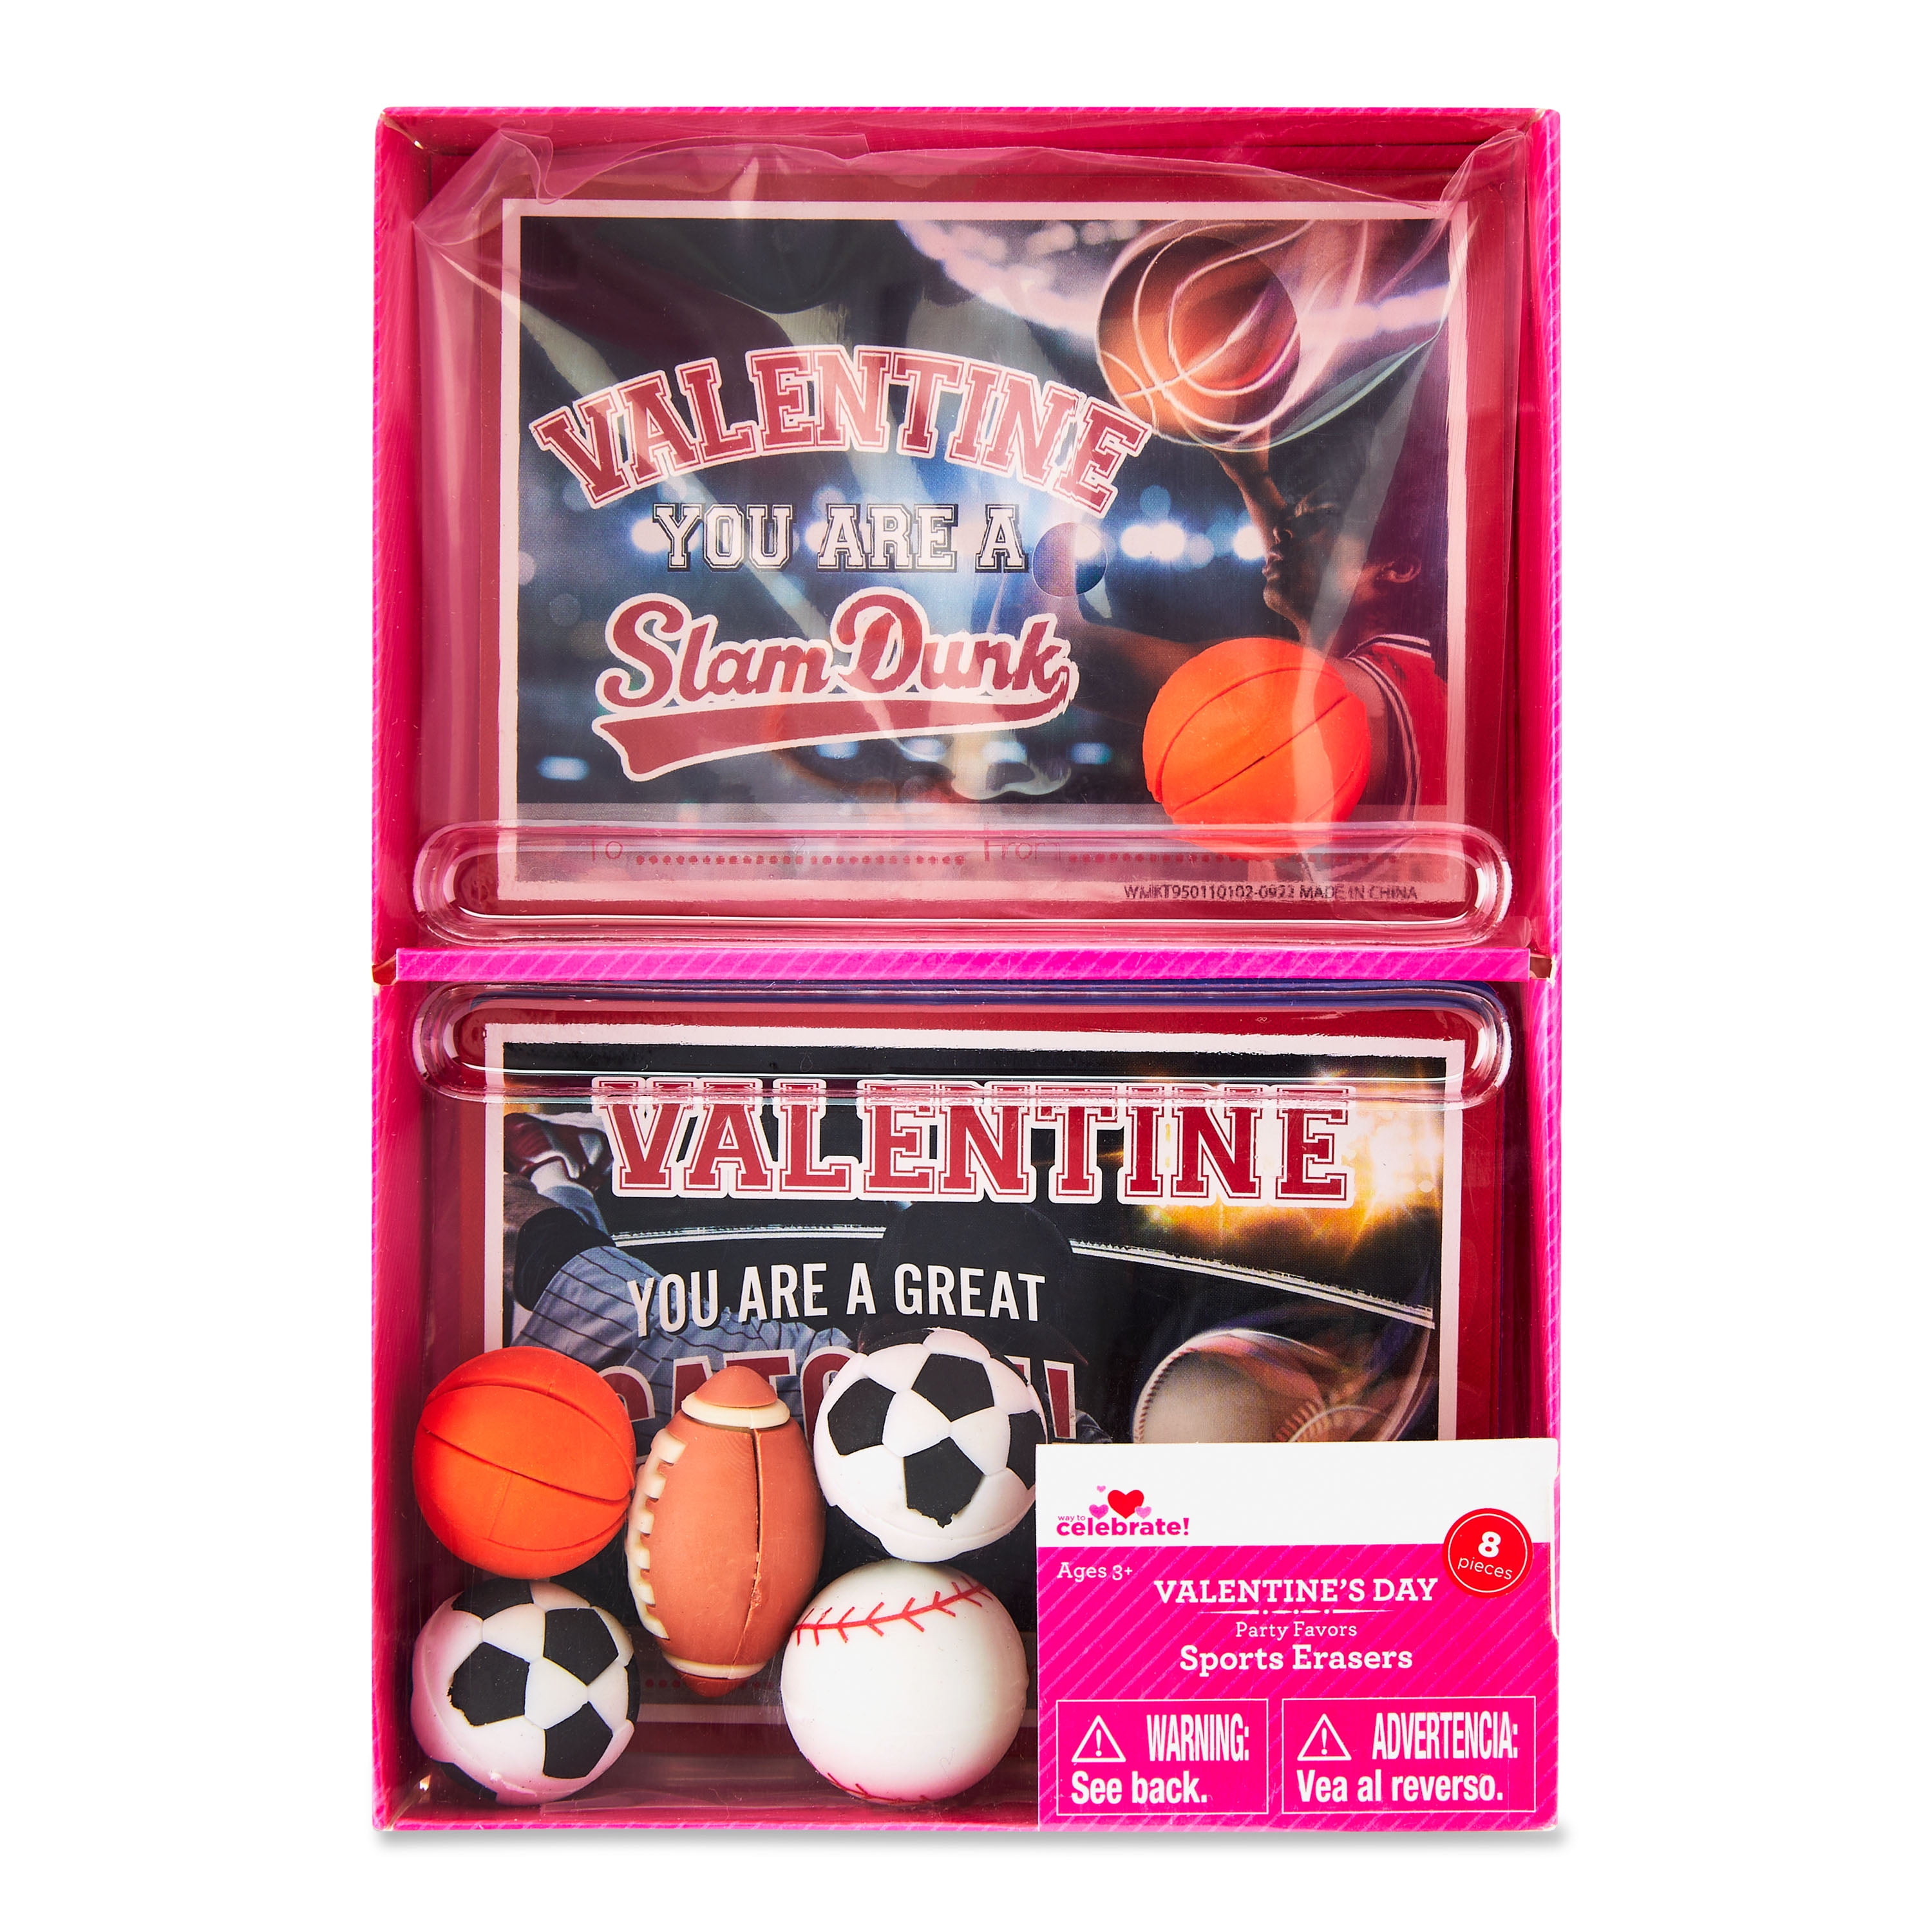 WAY TO CELEBRATE! Way to Celebrate 8 Sport Eraser, Party Favors, 8 Count, Multi Colors, Soccer, Football, Basketball, Baseball